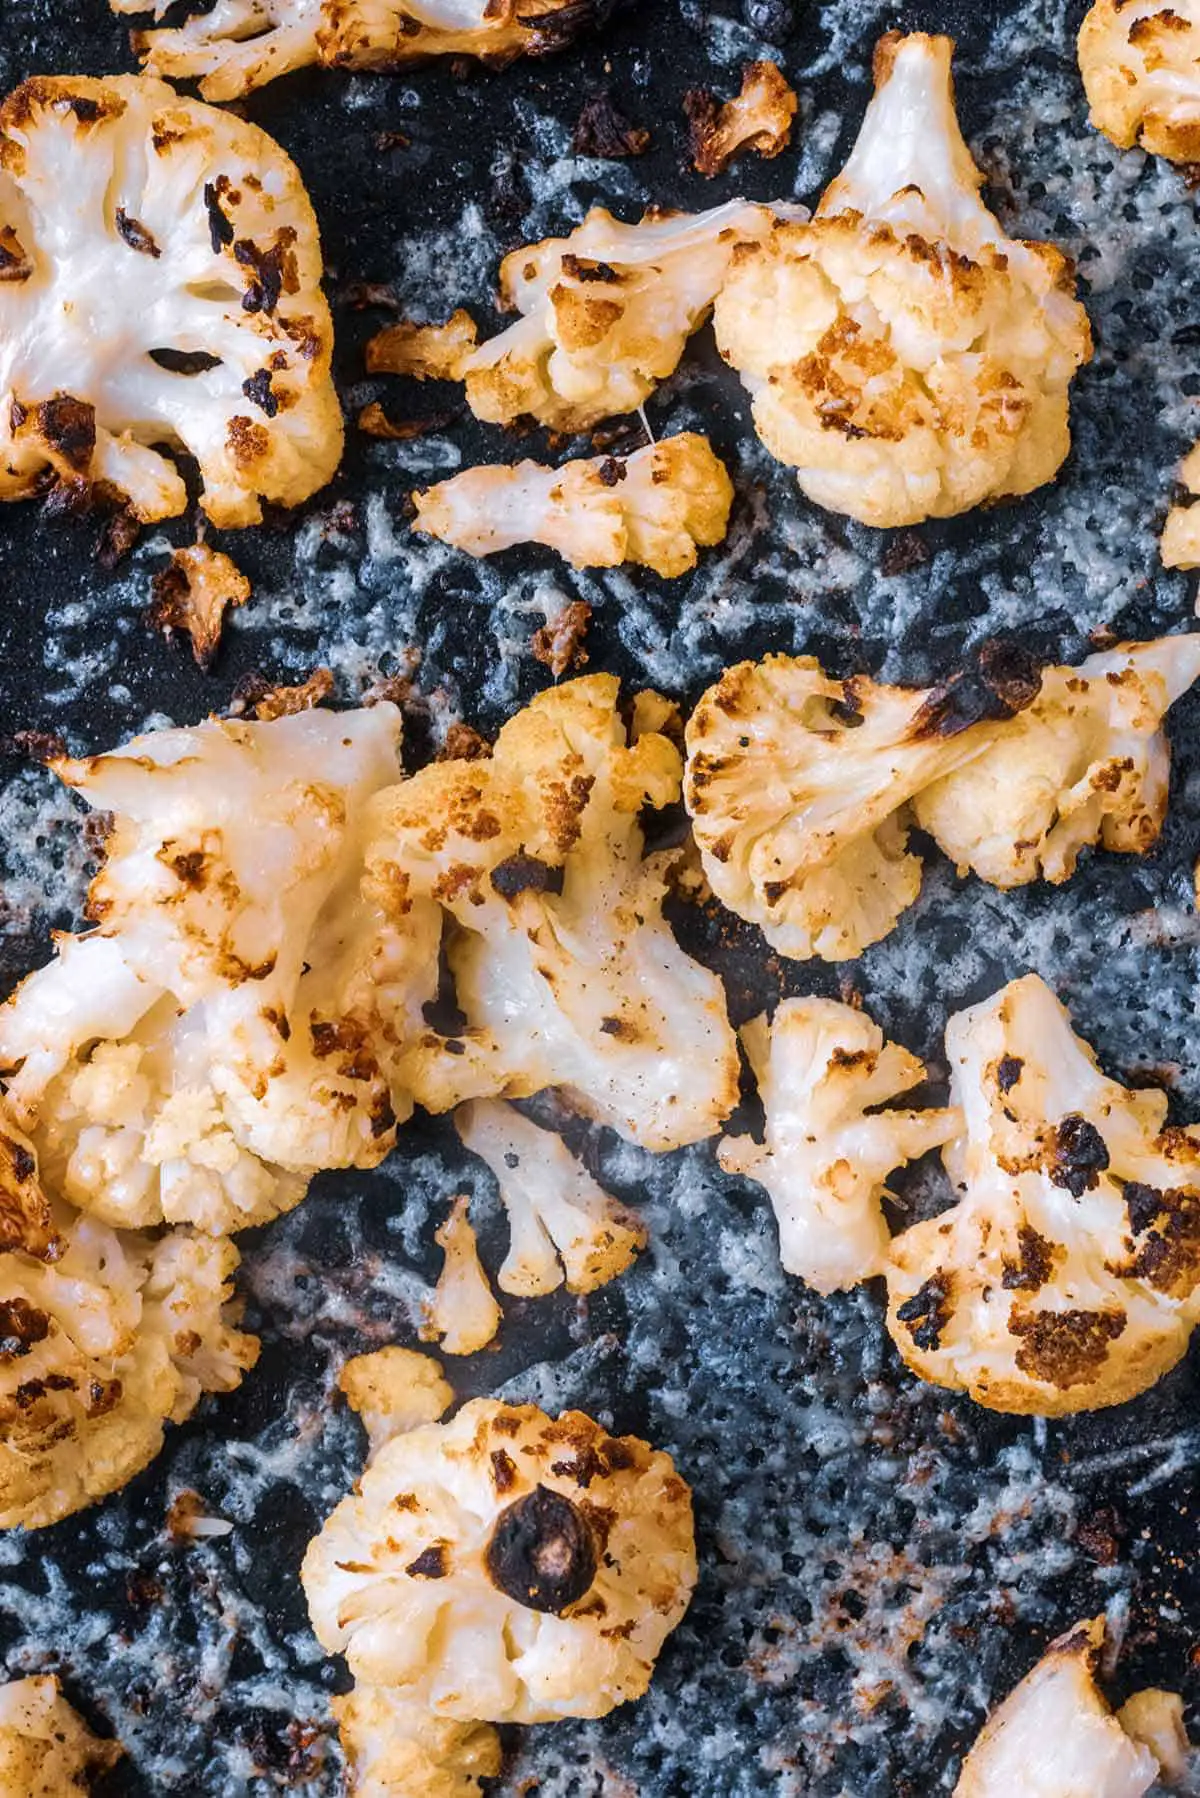 Cooked cauliflower florets and melted parmesan on a black baking tray,